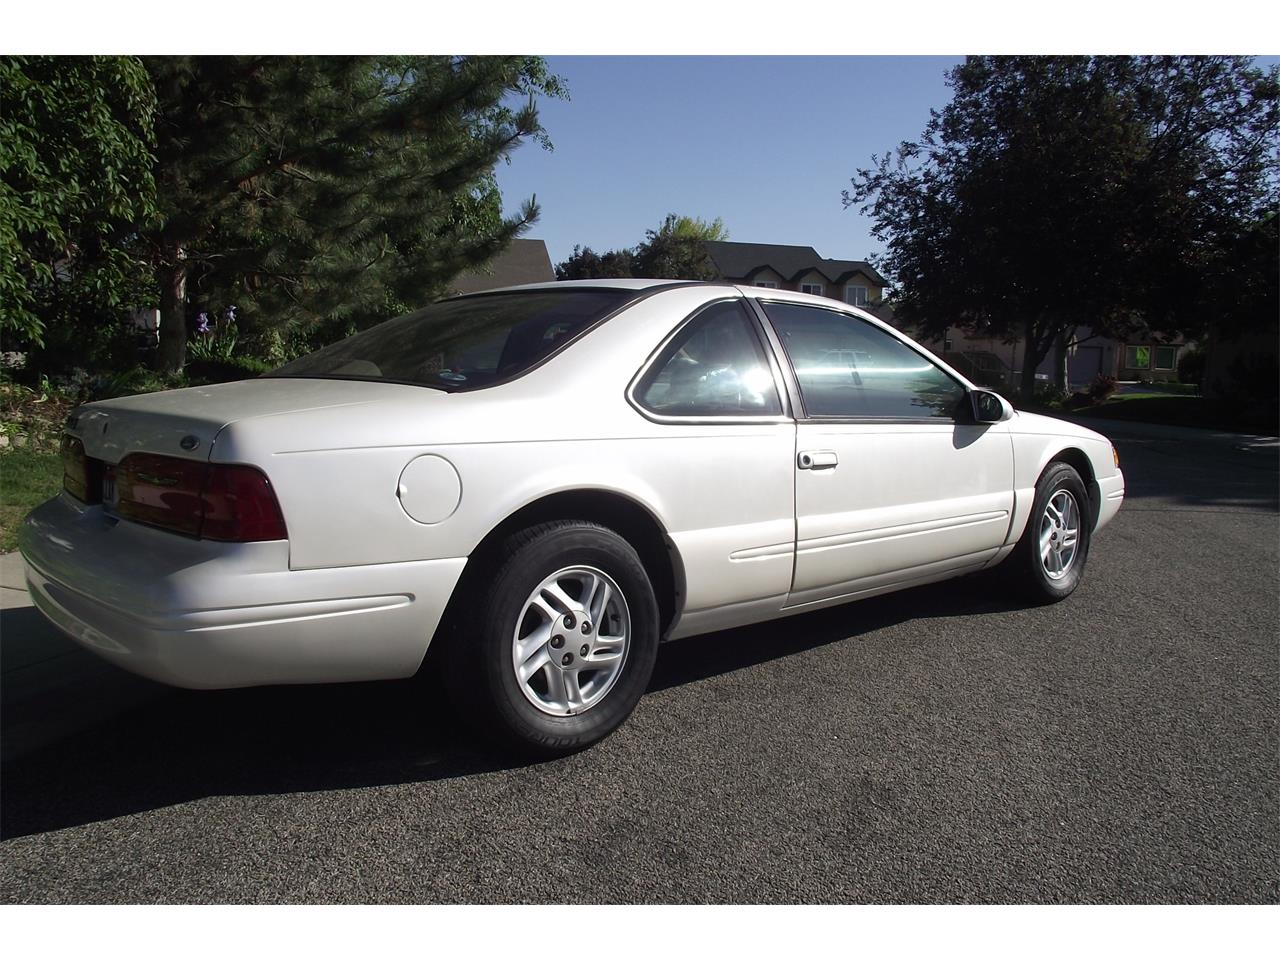 1996 ford thunderbird lx for sale instructions for downloading zoom meetings